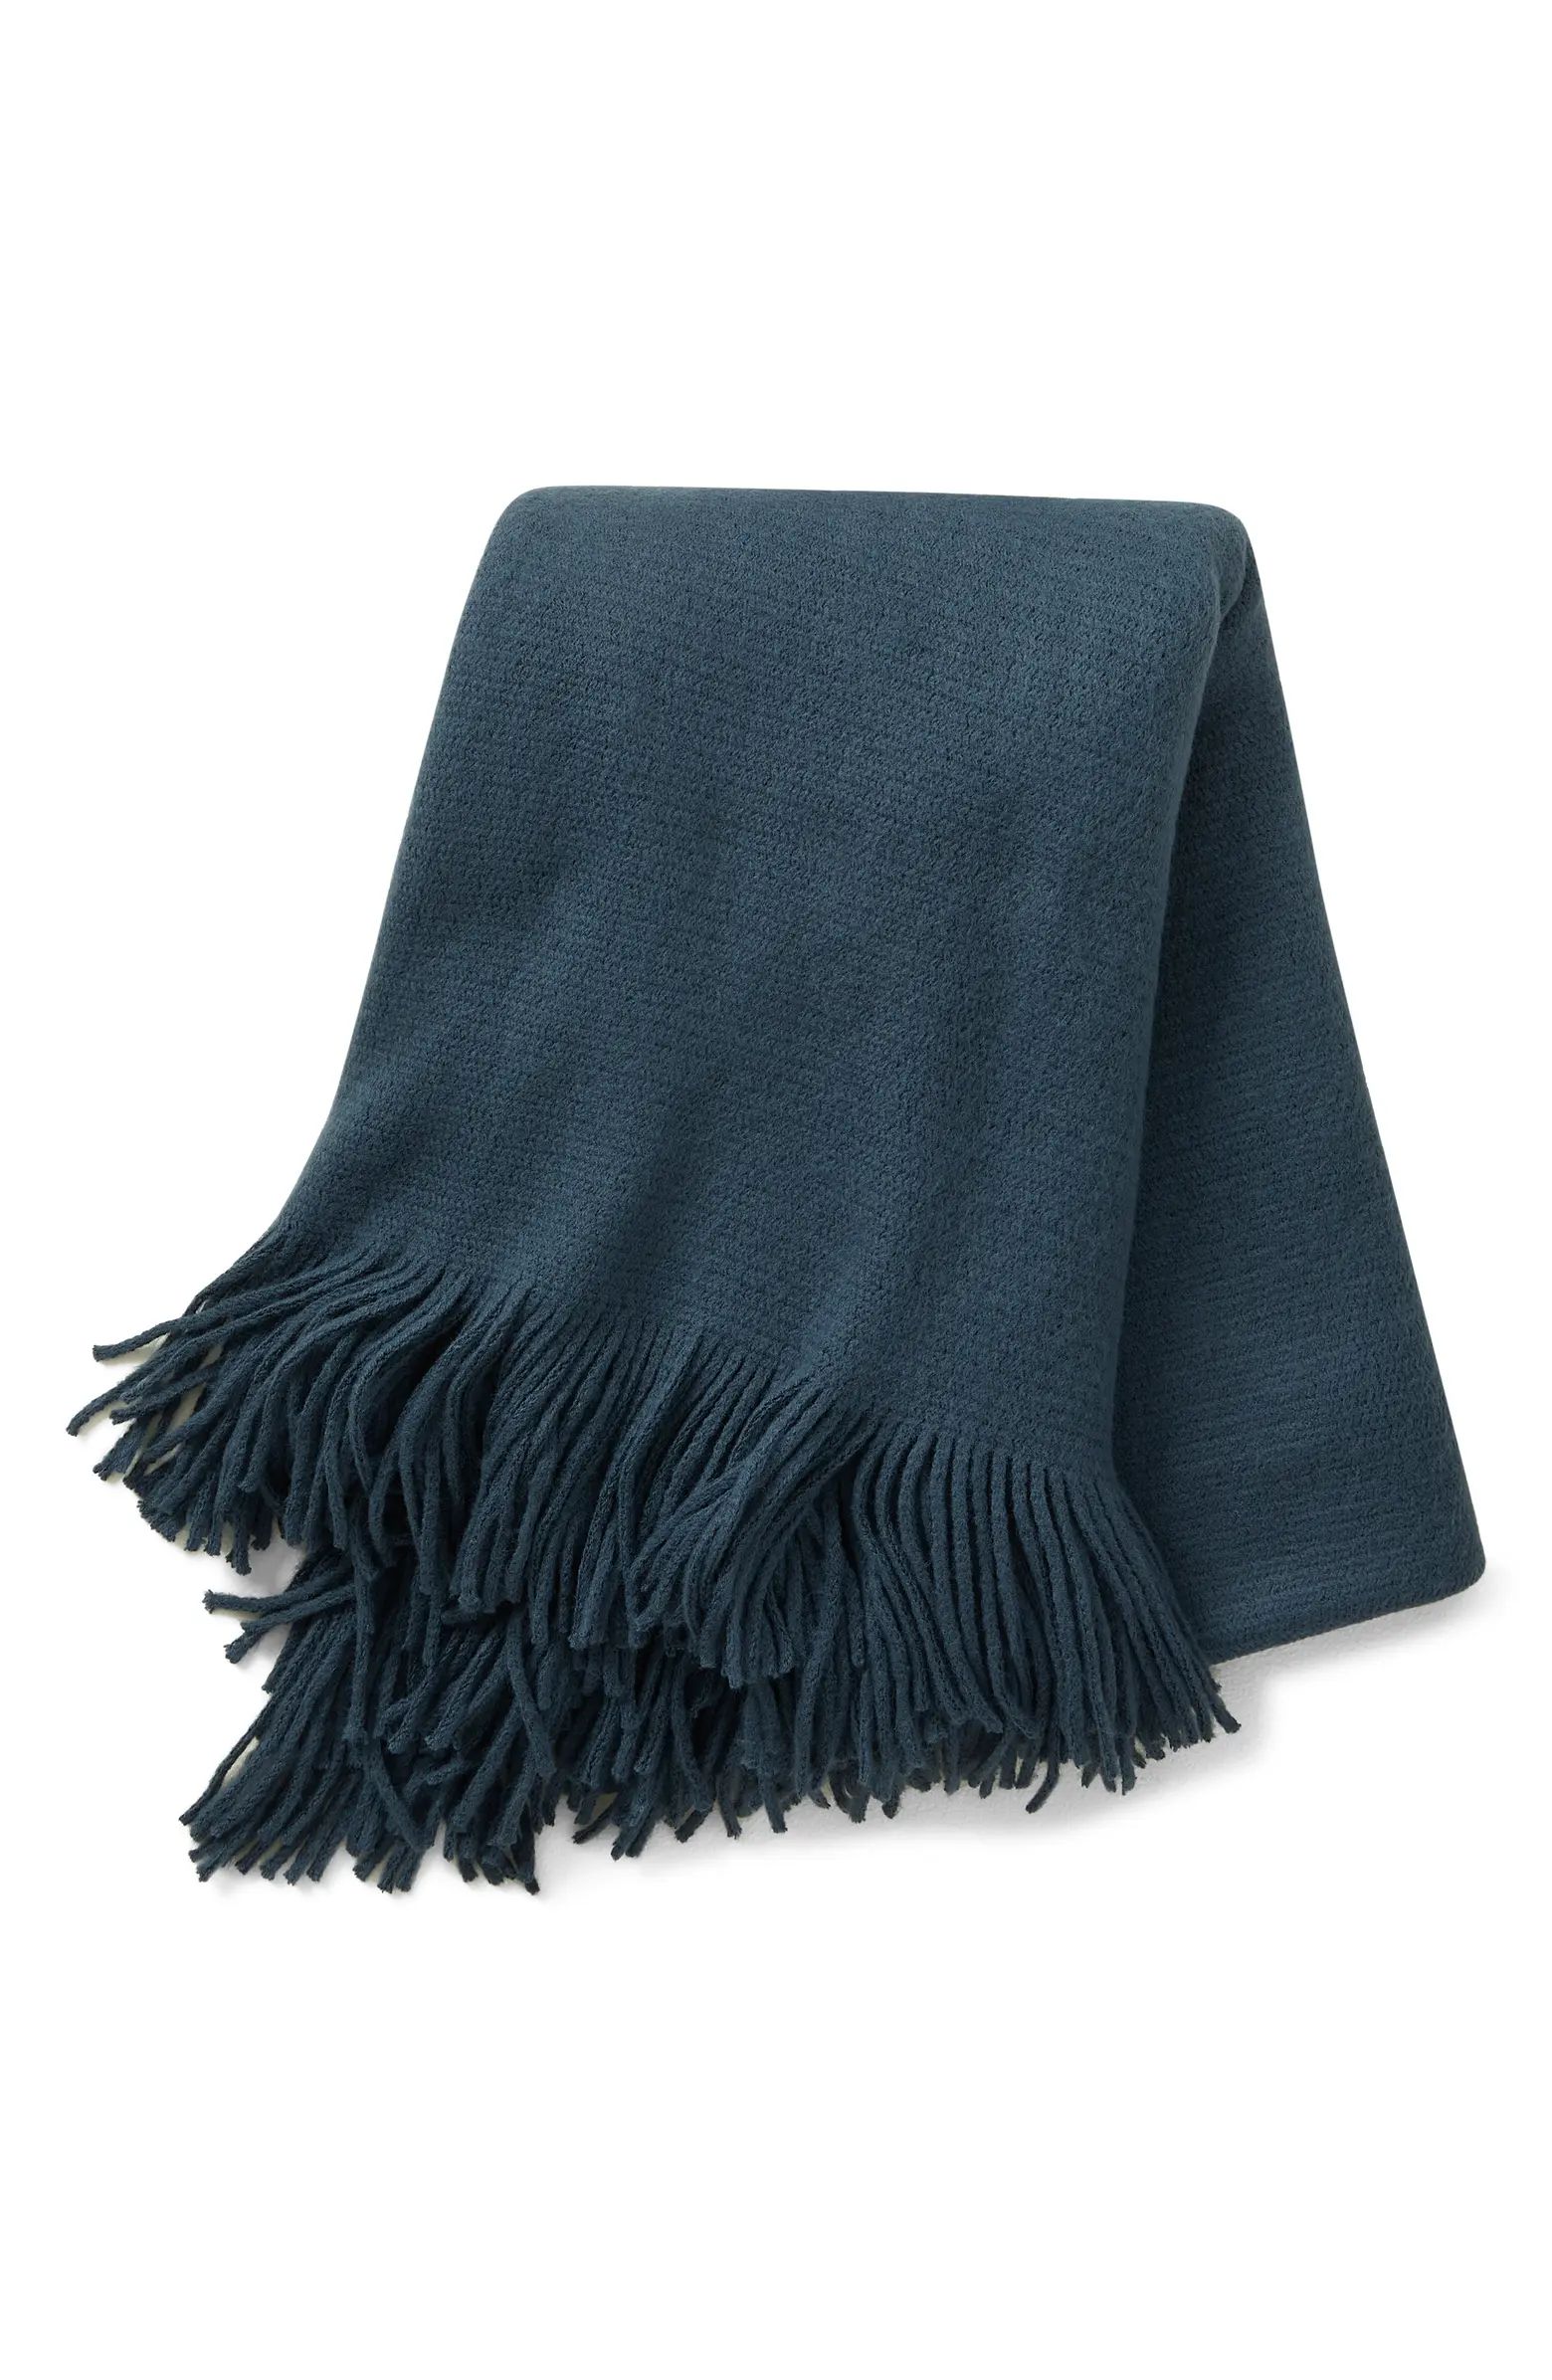 UPWEST x Nordstrom The Softest Throw | Nordstrom | Nordstrom